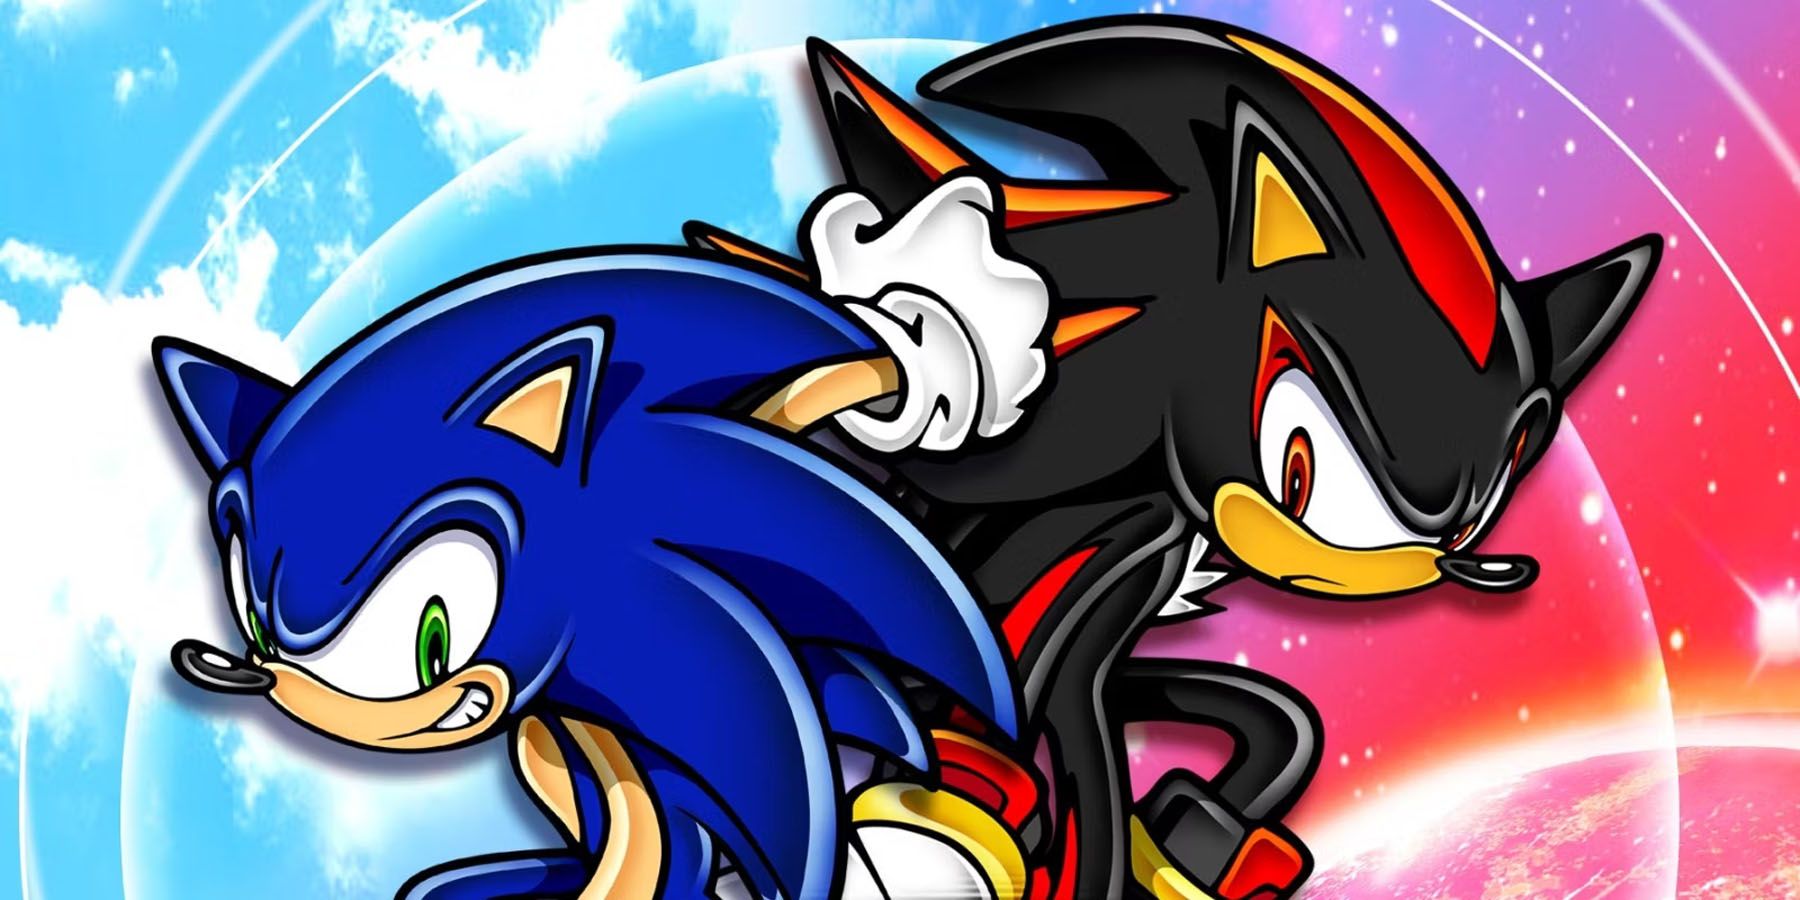 What the Sonic Adventure 2 game can tell you about the Sonic 3